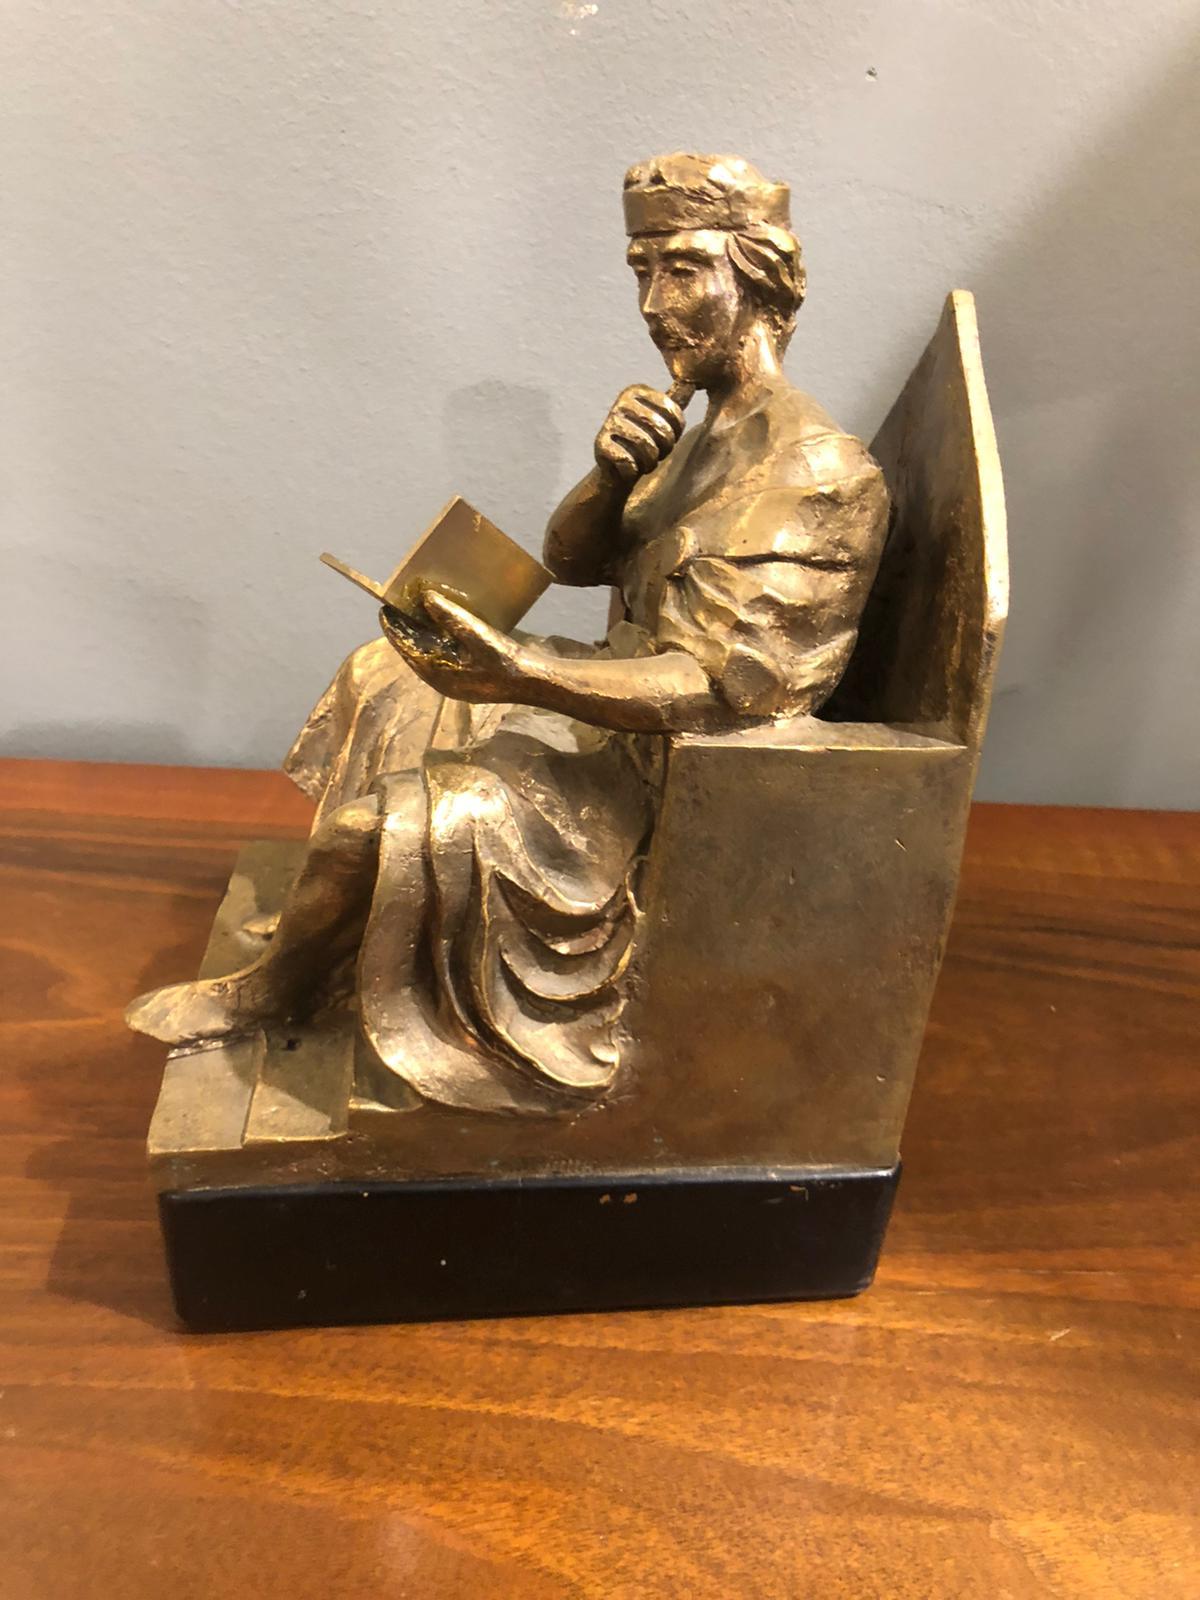 The gilded bronze sculpture of this King seated on his throne, wearing his crown, while he is absorbed in reading a book is very rare and particular. The figure stands elegantly, and the faded and somewhat worn gilt bronze surface shows a beautiful